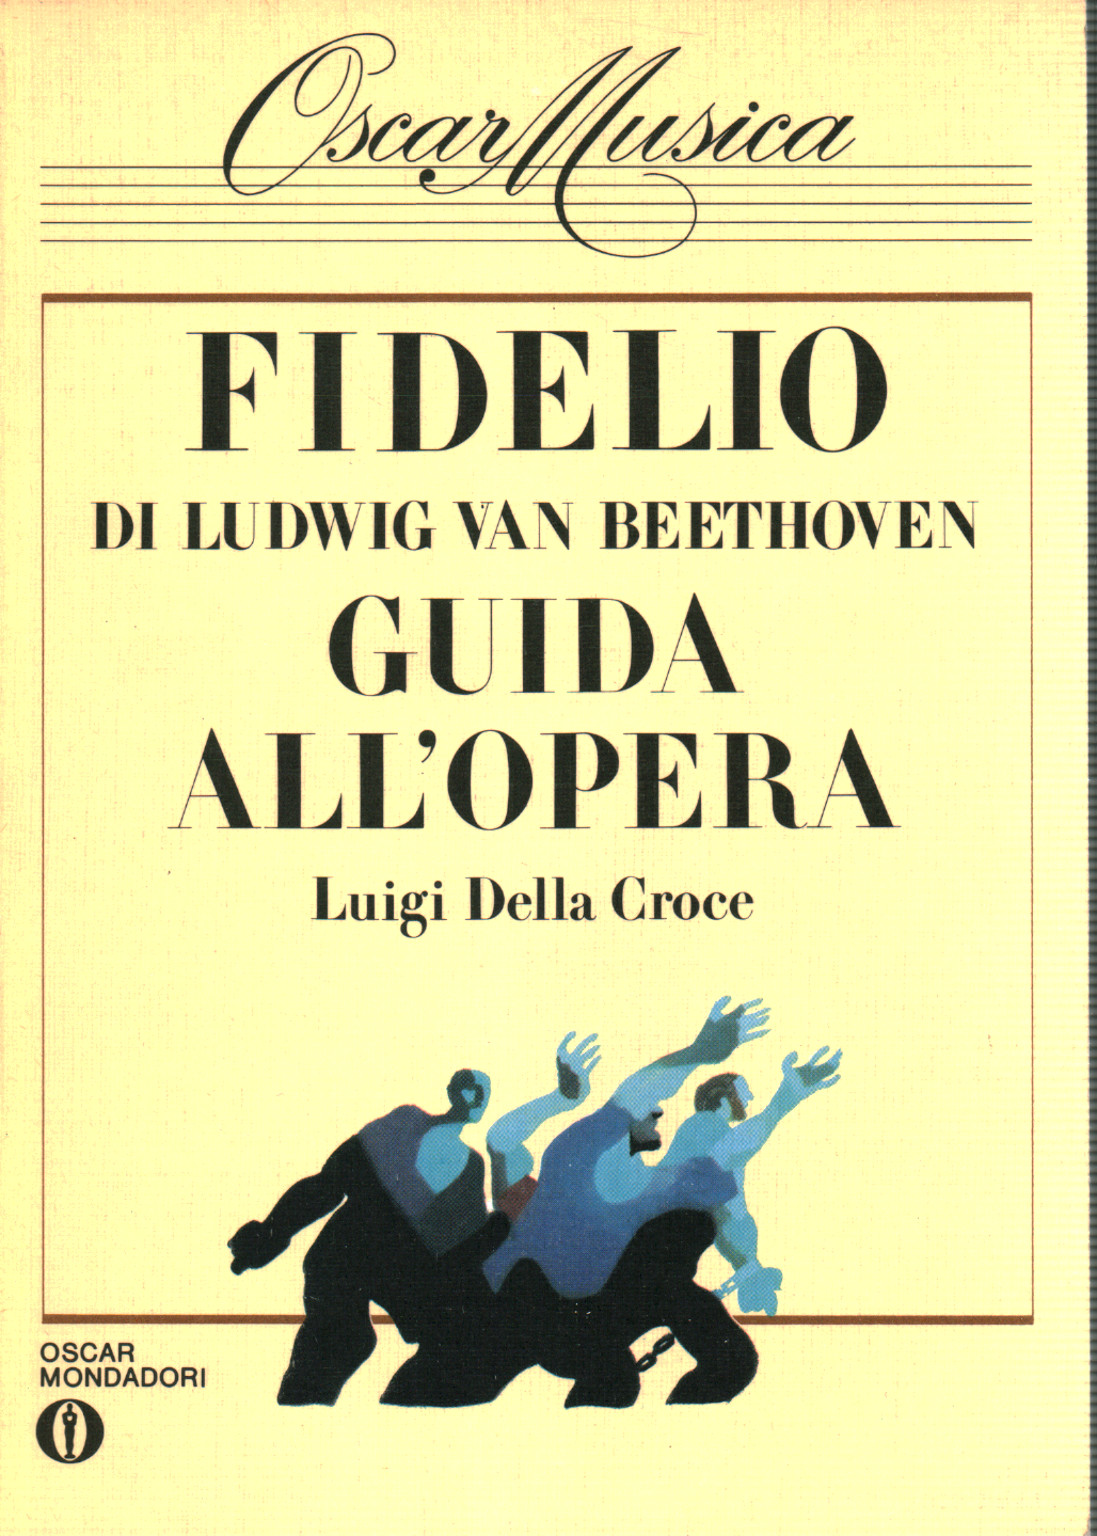 Fidelio by Ludwig Van Beethoven, s.a.